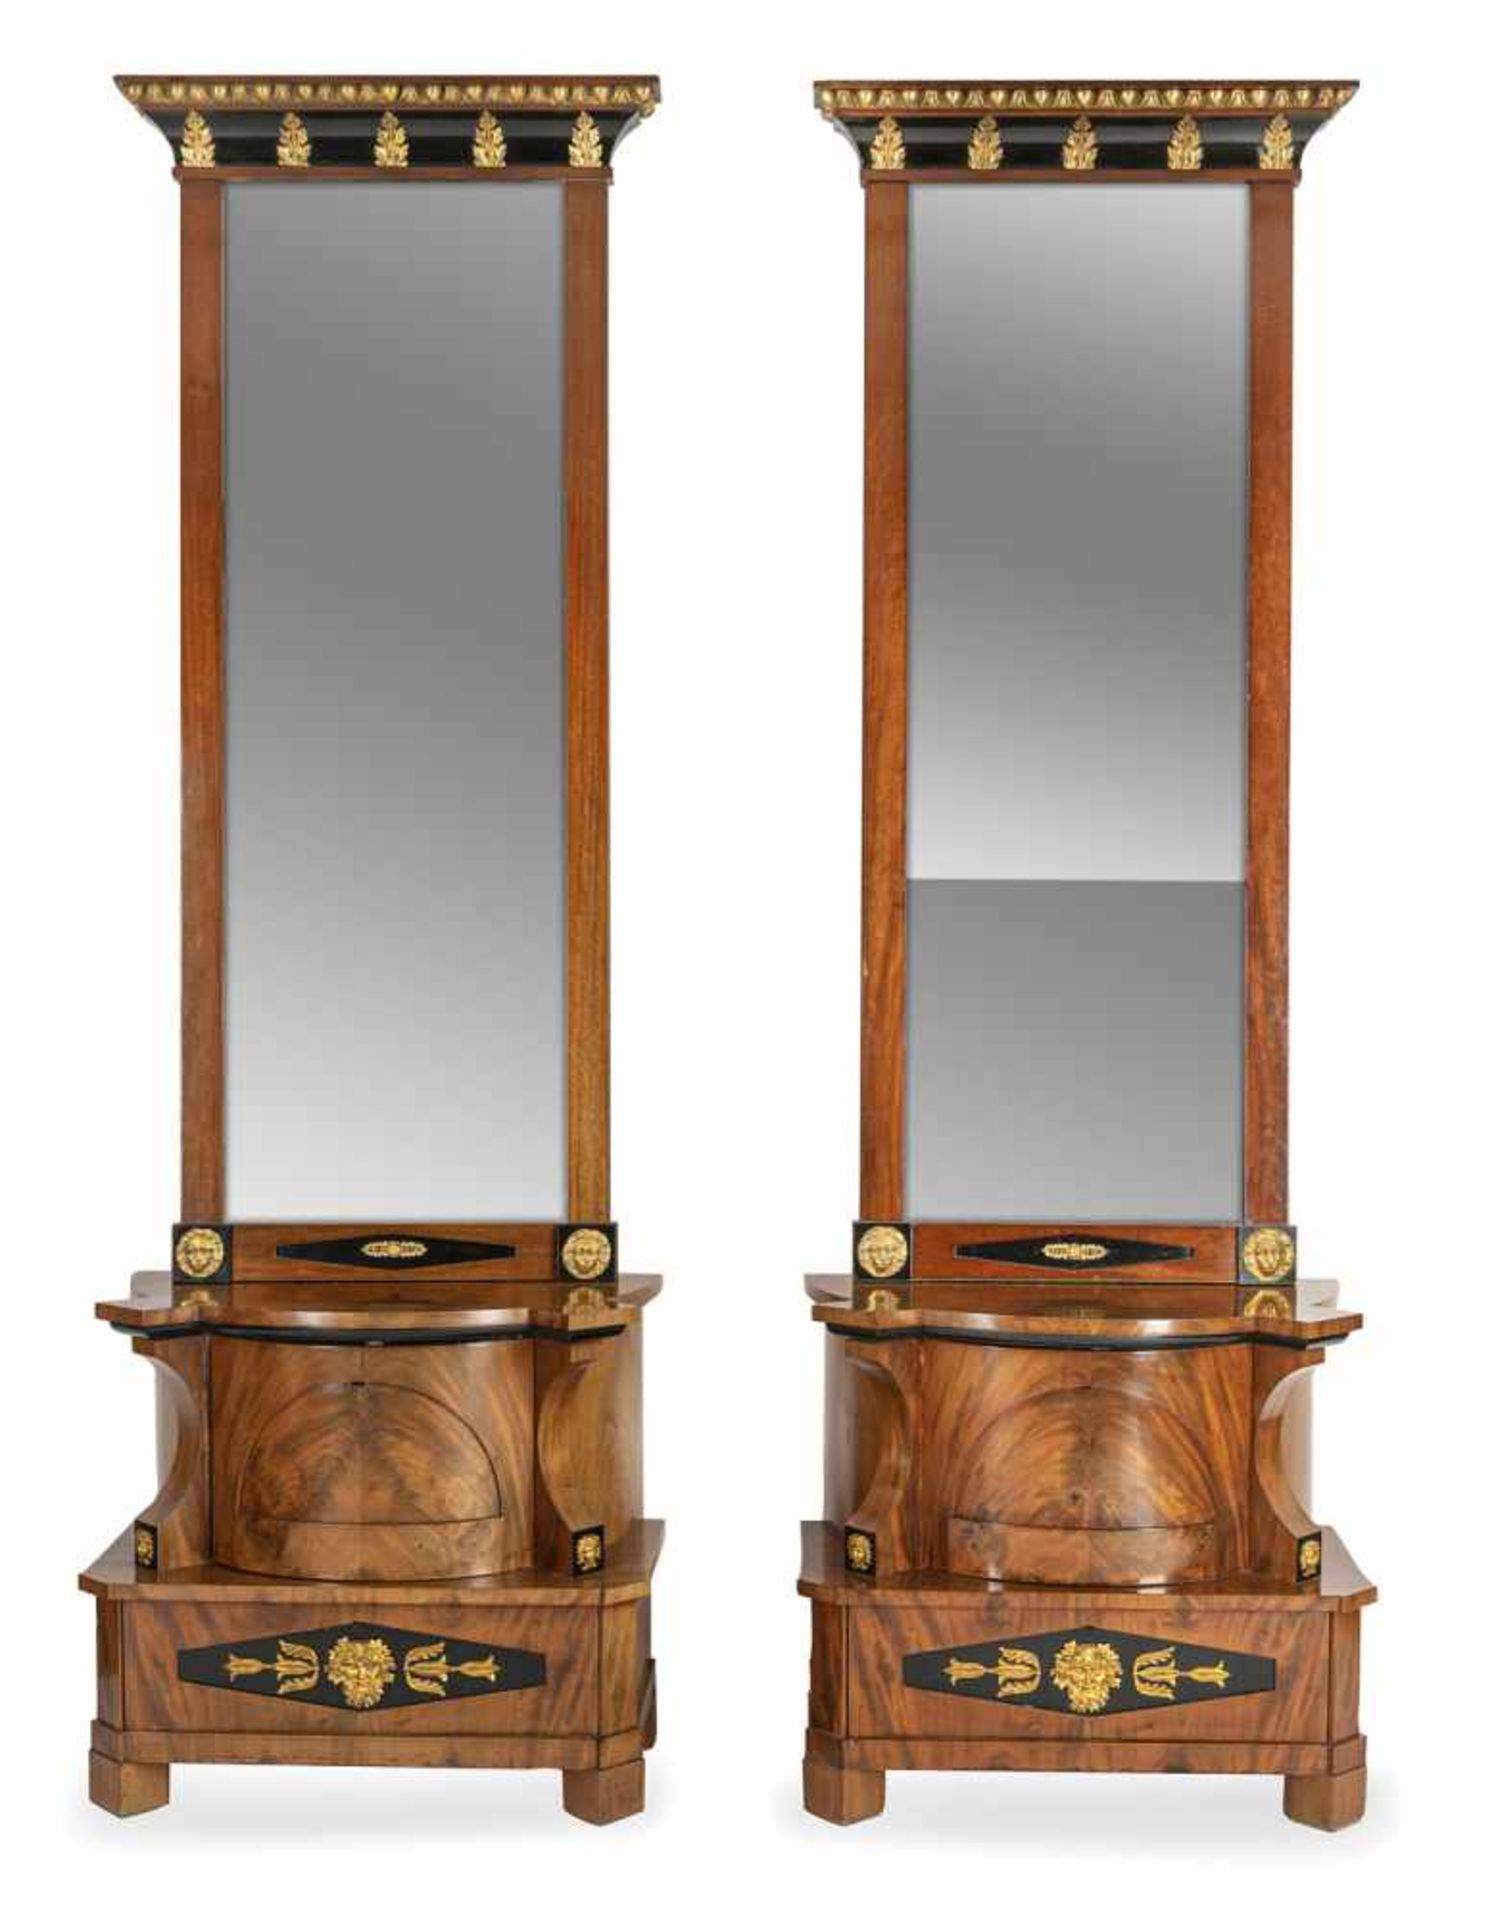 An opulent pair of Biedermeier mahogany commodes and mirrors (one mirror later), North Germany, c.